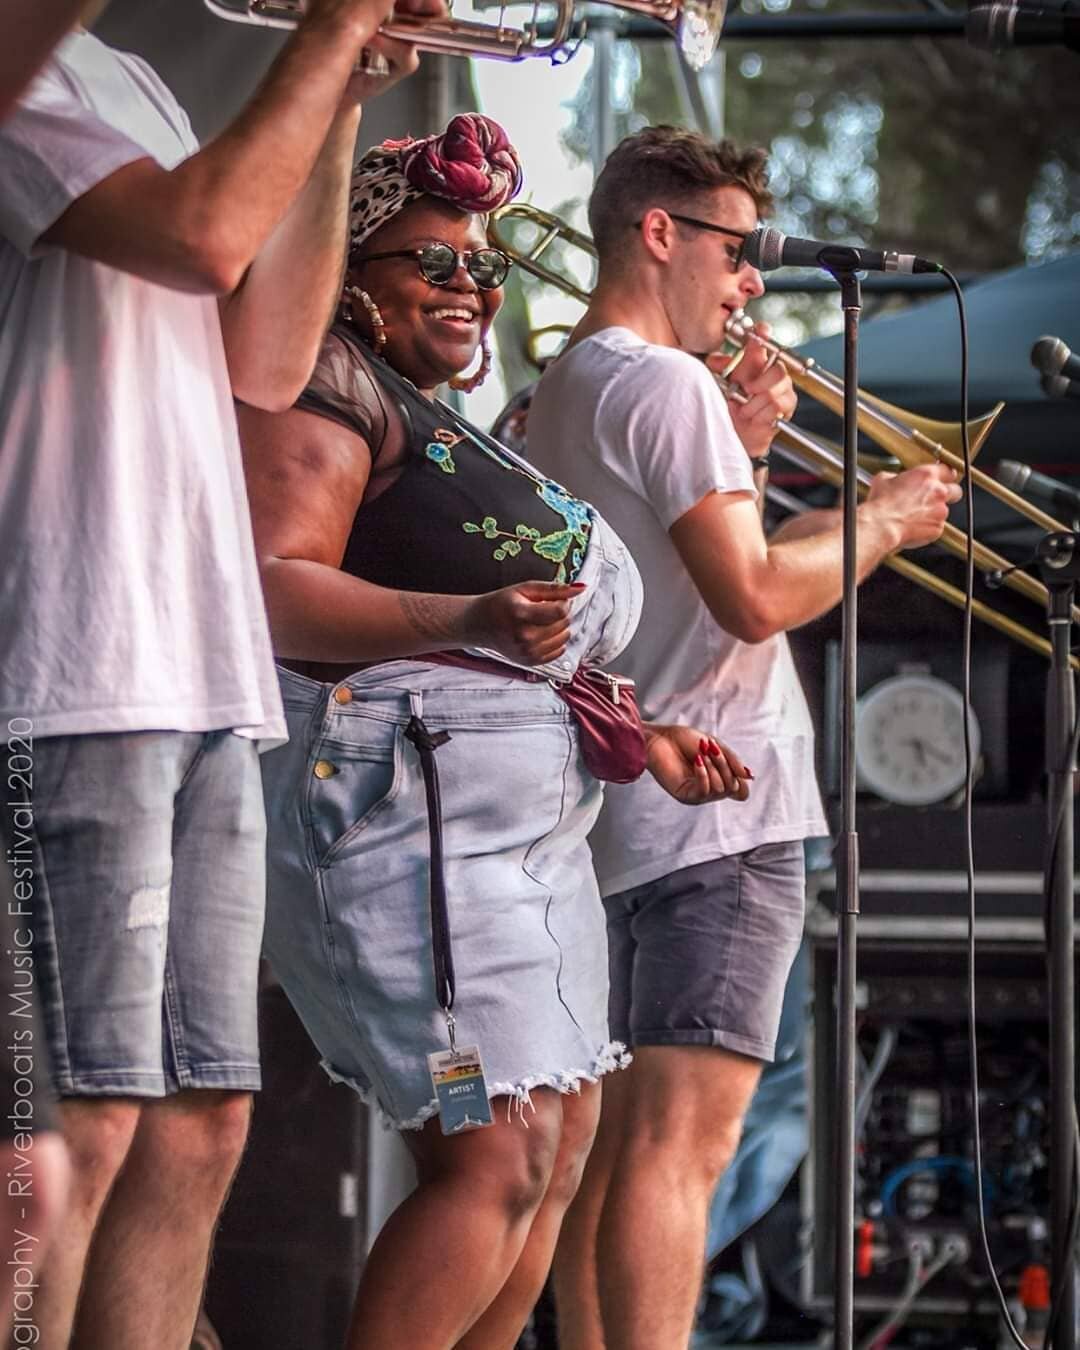 Throw back to pre-social distancing at Riverboats Music Festival ... so much fun! 
Photo by Lisa Kenny. 
@riverboatsmusic .
.
.

#hornsofleroy #summer #festival  #riverboats #music #live #fun #party #lisakenny #photography #thando #brassband #austral